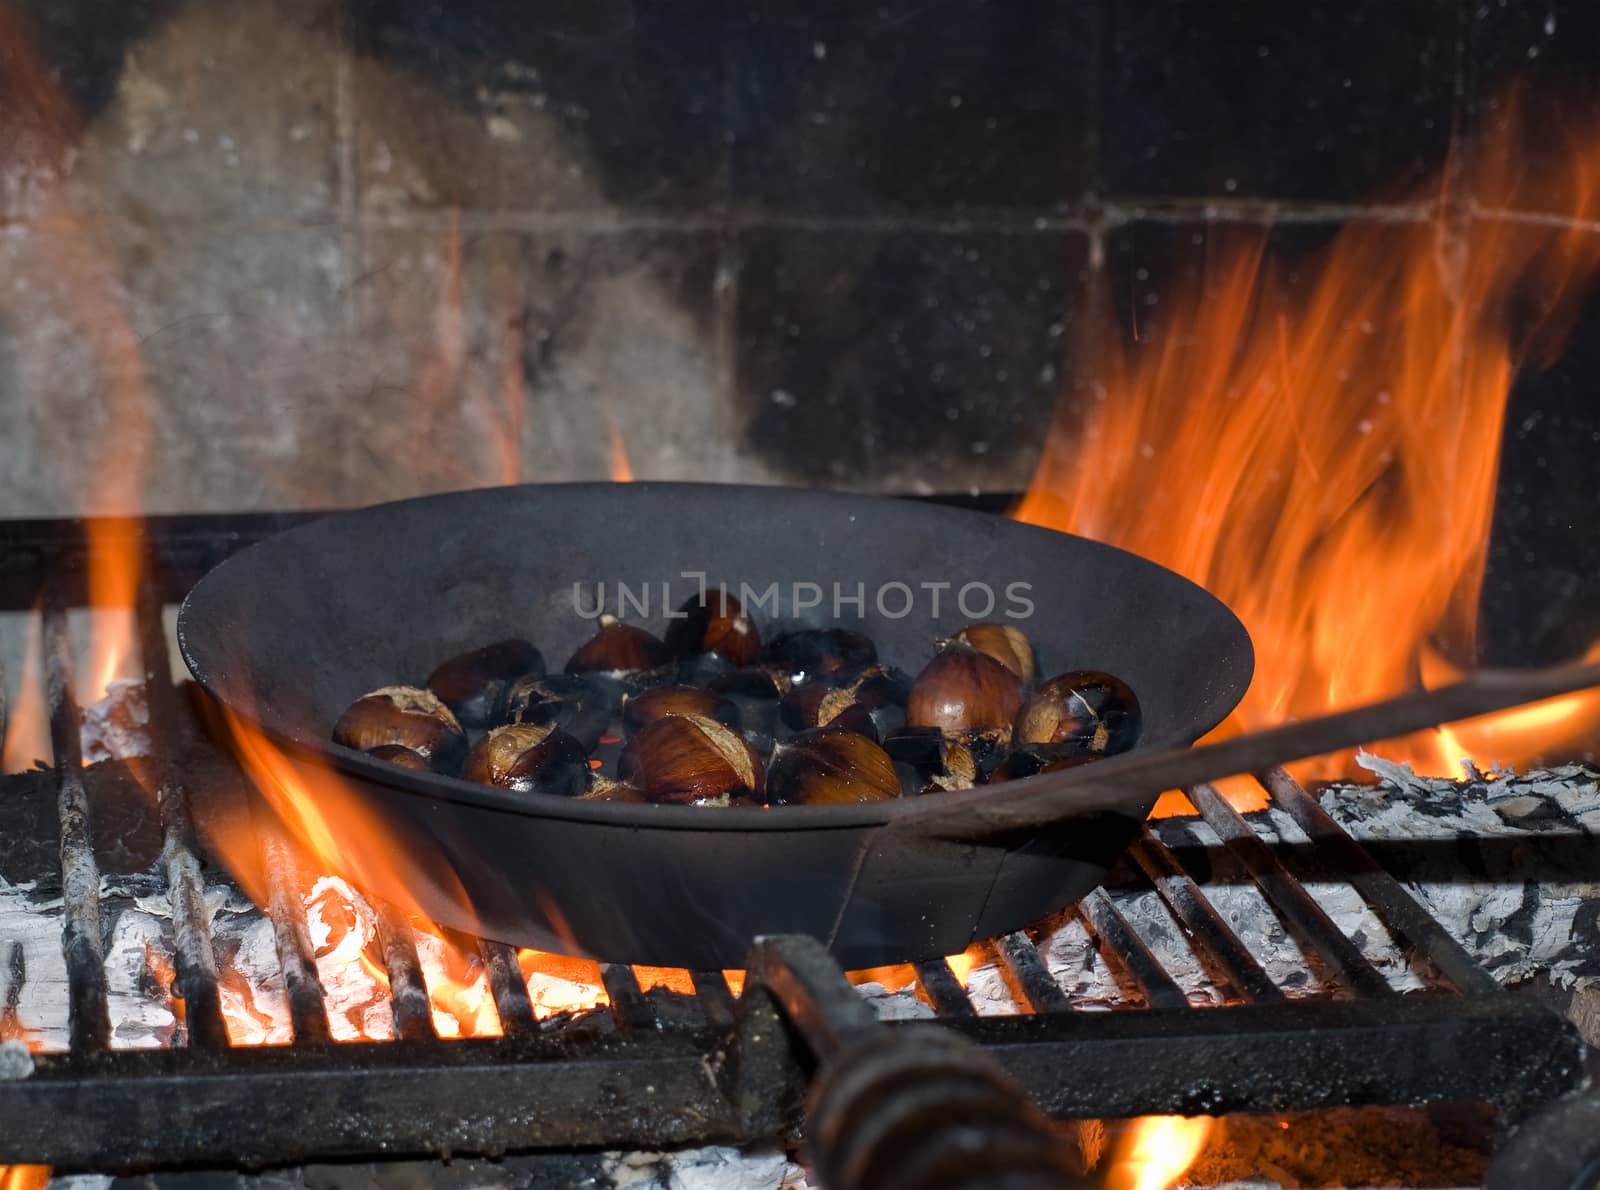 roasted chestnuts in the fireplace by sette